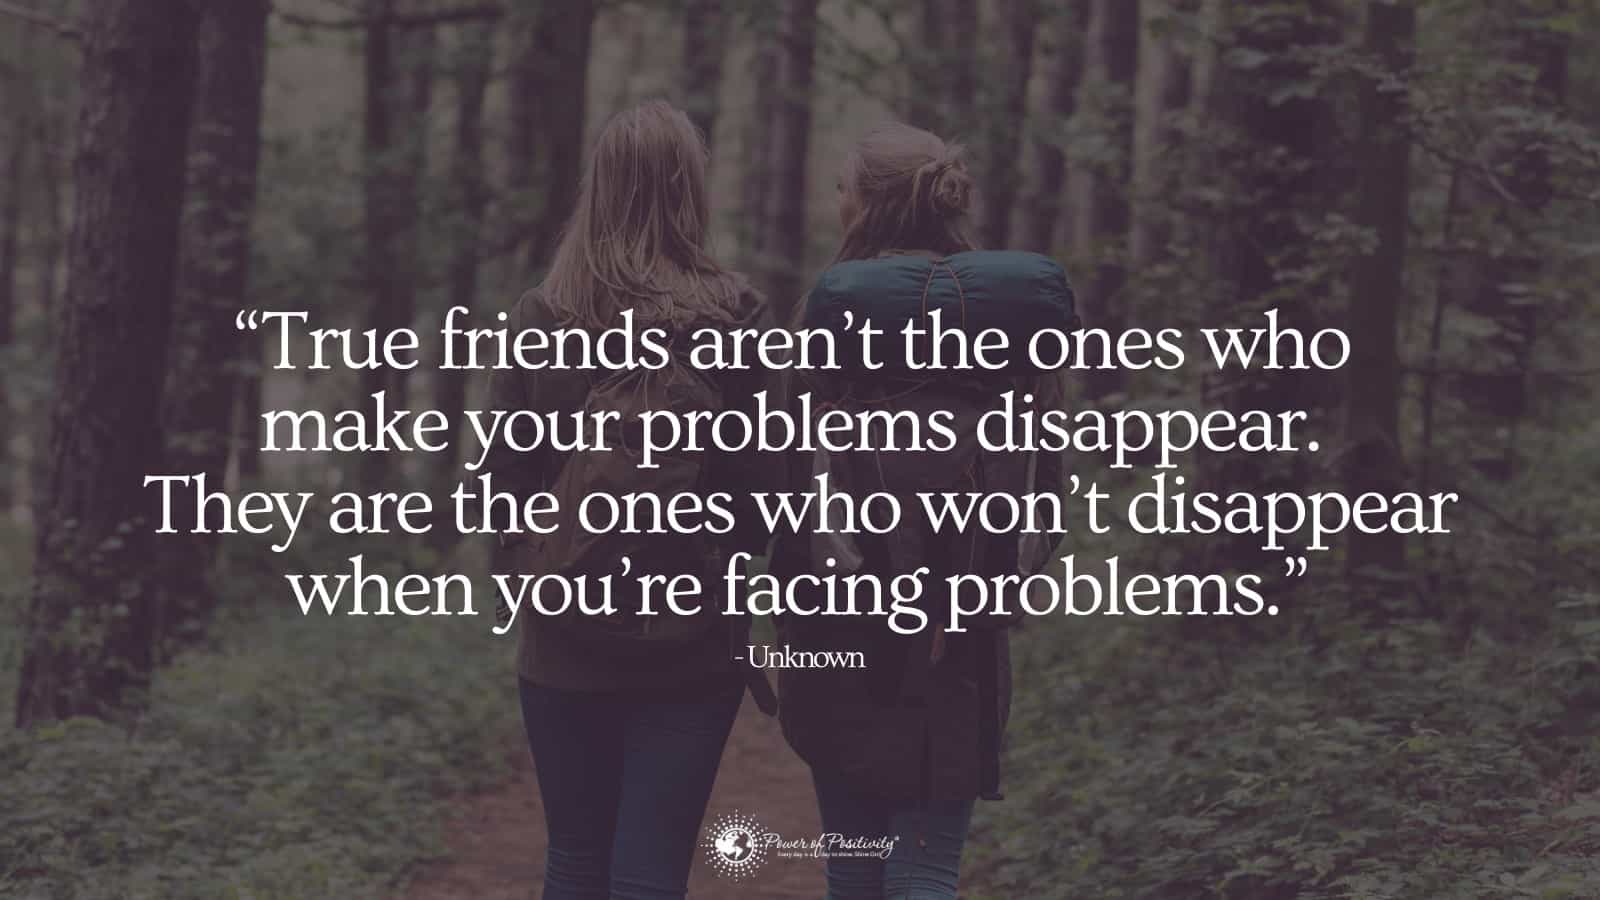 20 of the Best Quotes on Friendship You’ll Ever Hear